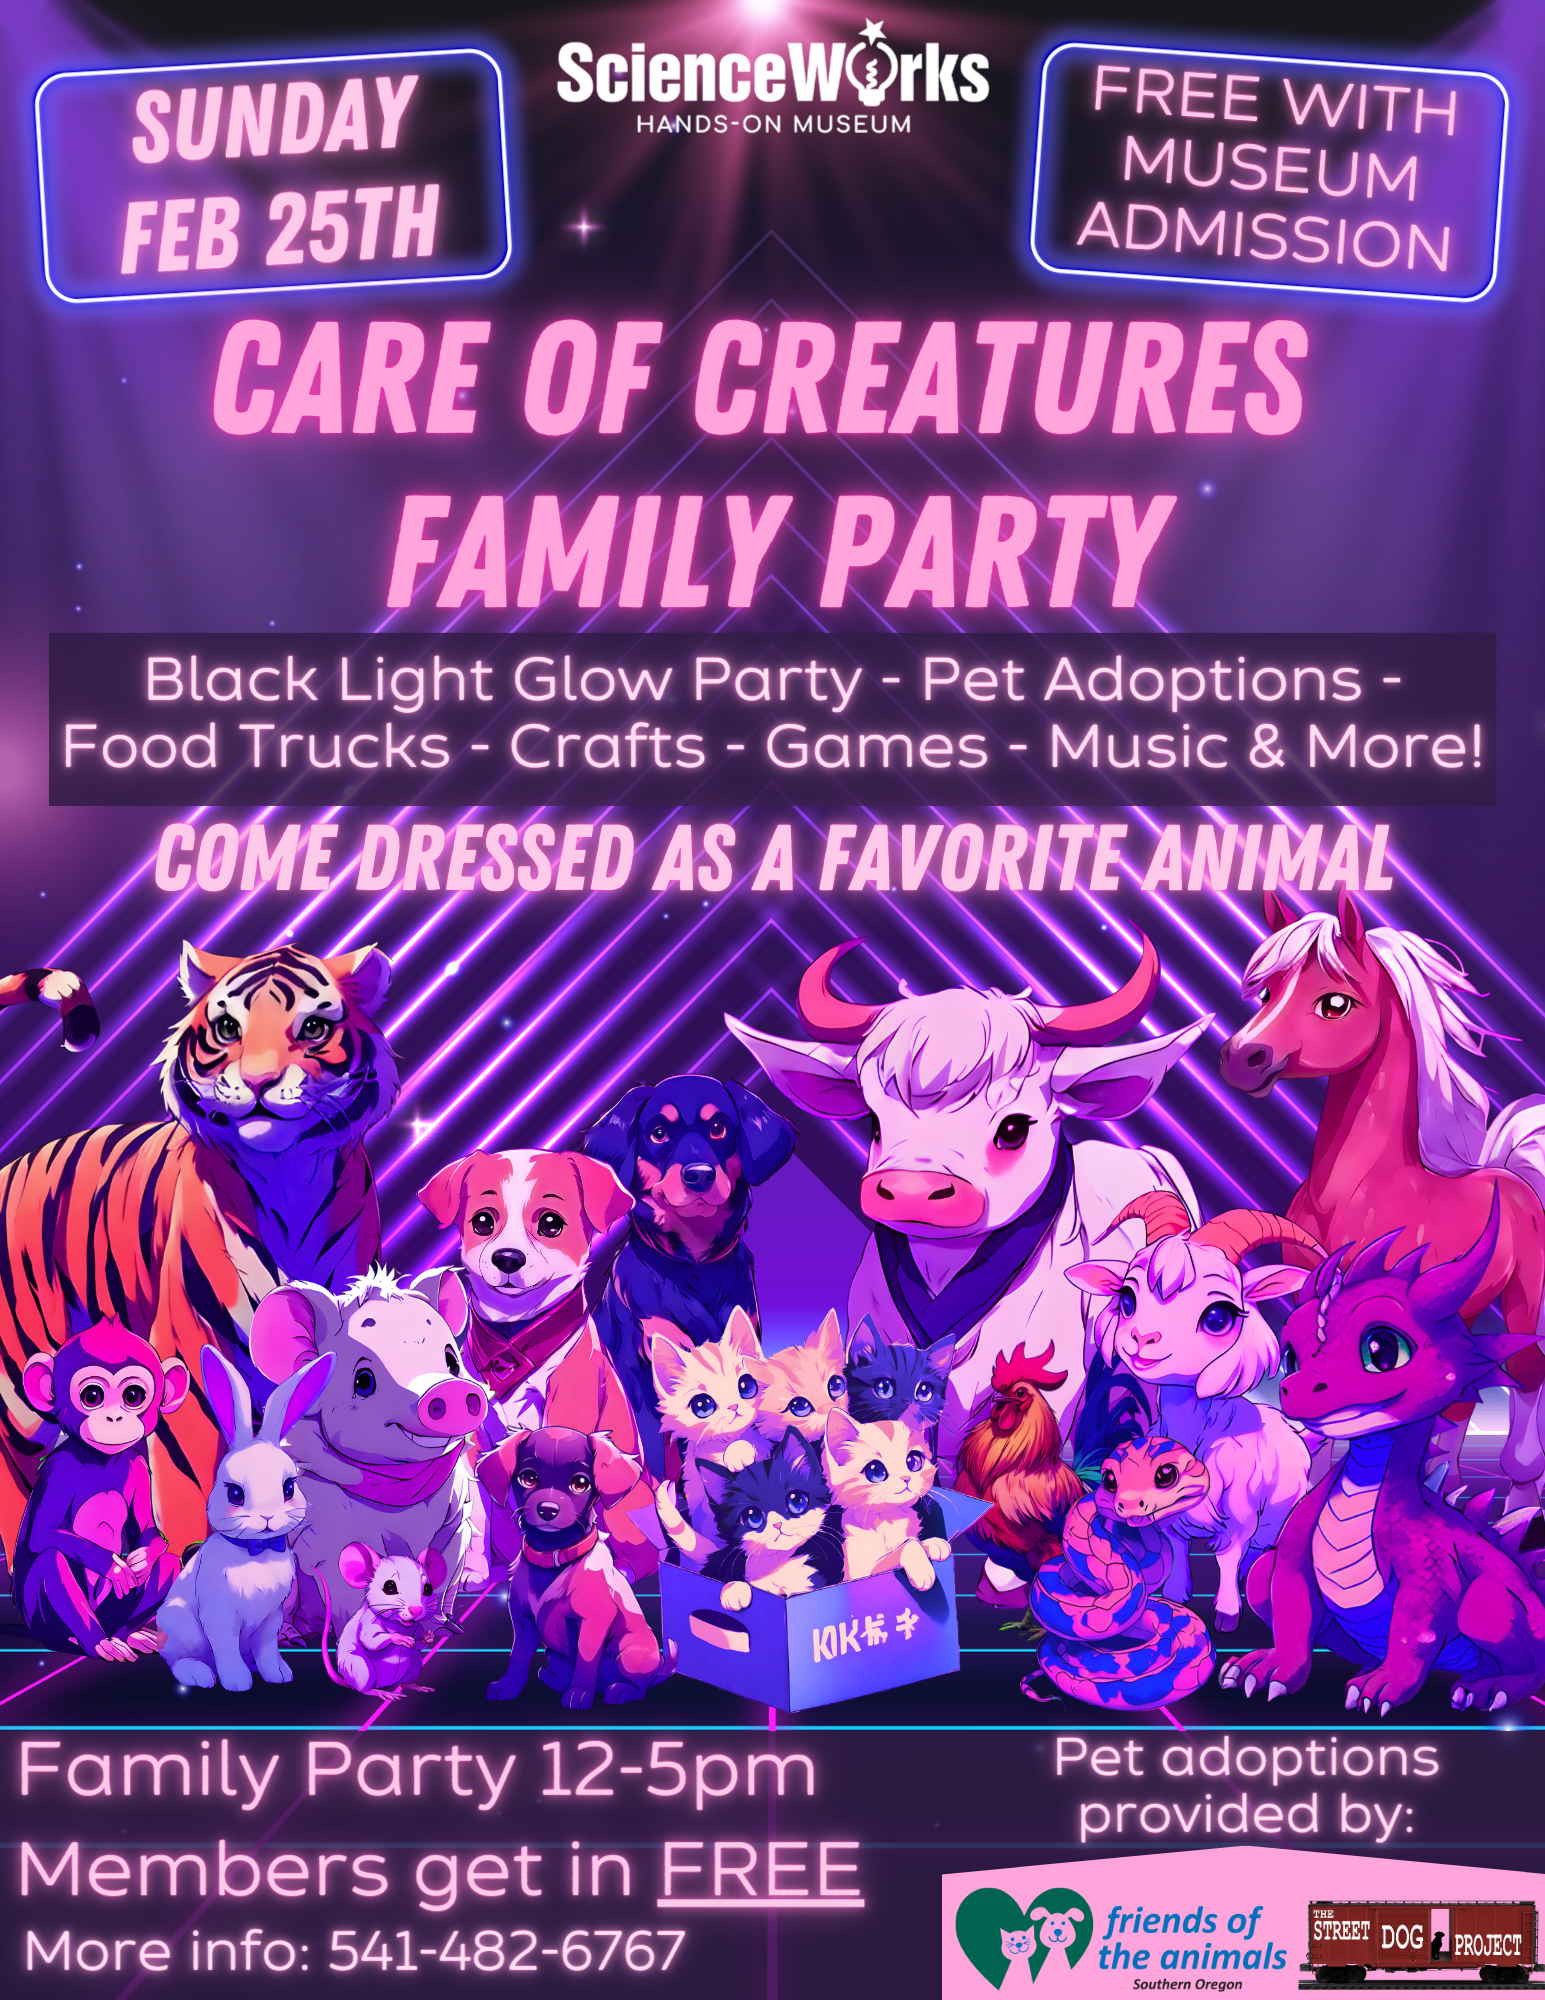 Care of Creatures Family Party